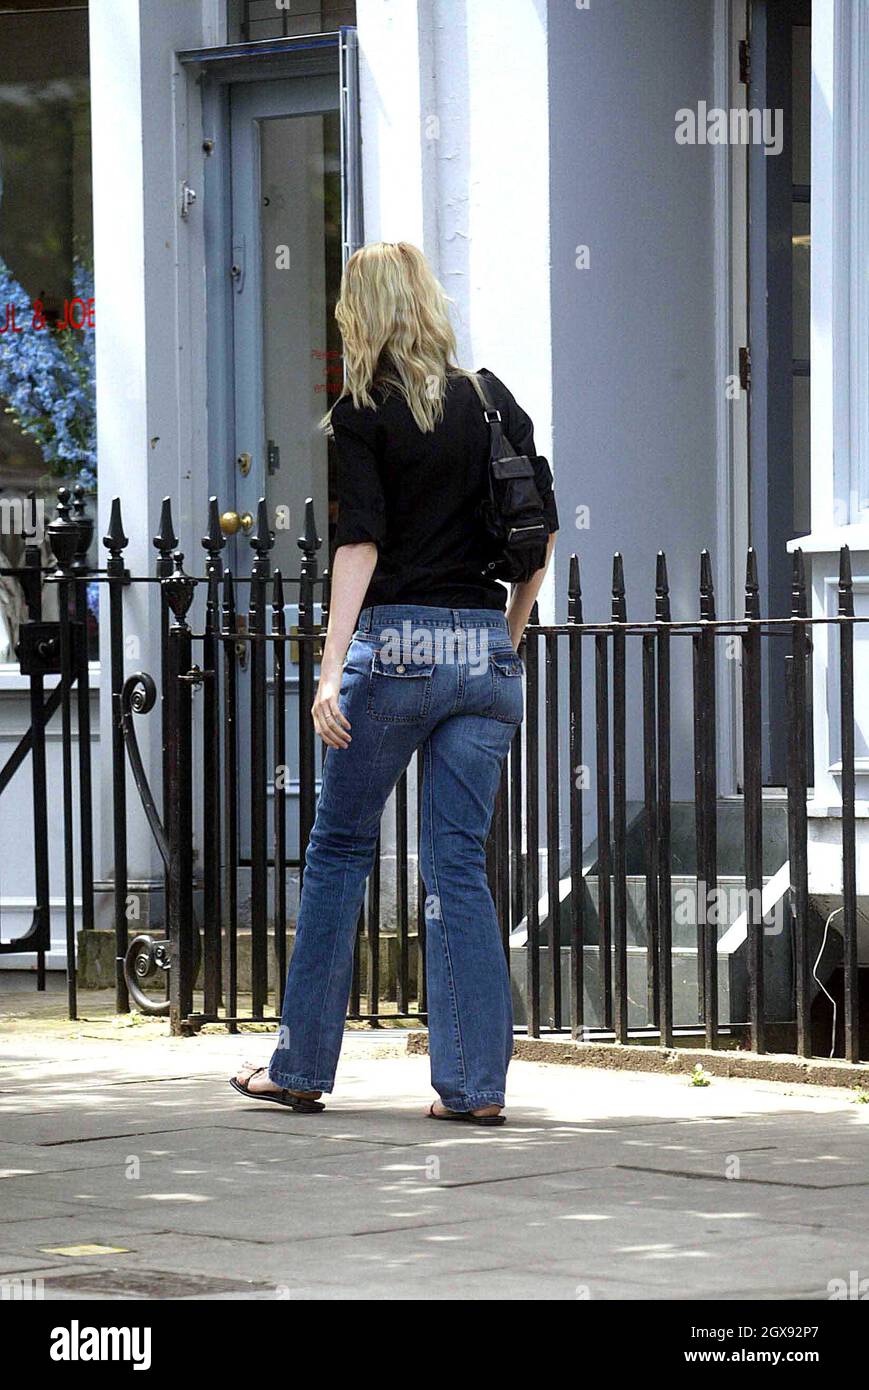 Claudia Schiffer, supermodel, with her 'does my bum look big in this' jeans  as she shops at the half price sales in west London Stock Photo - Alamy